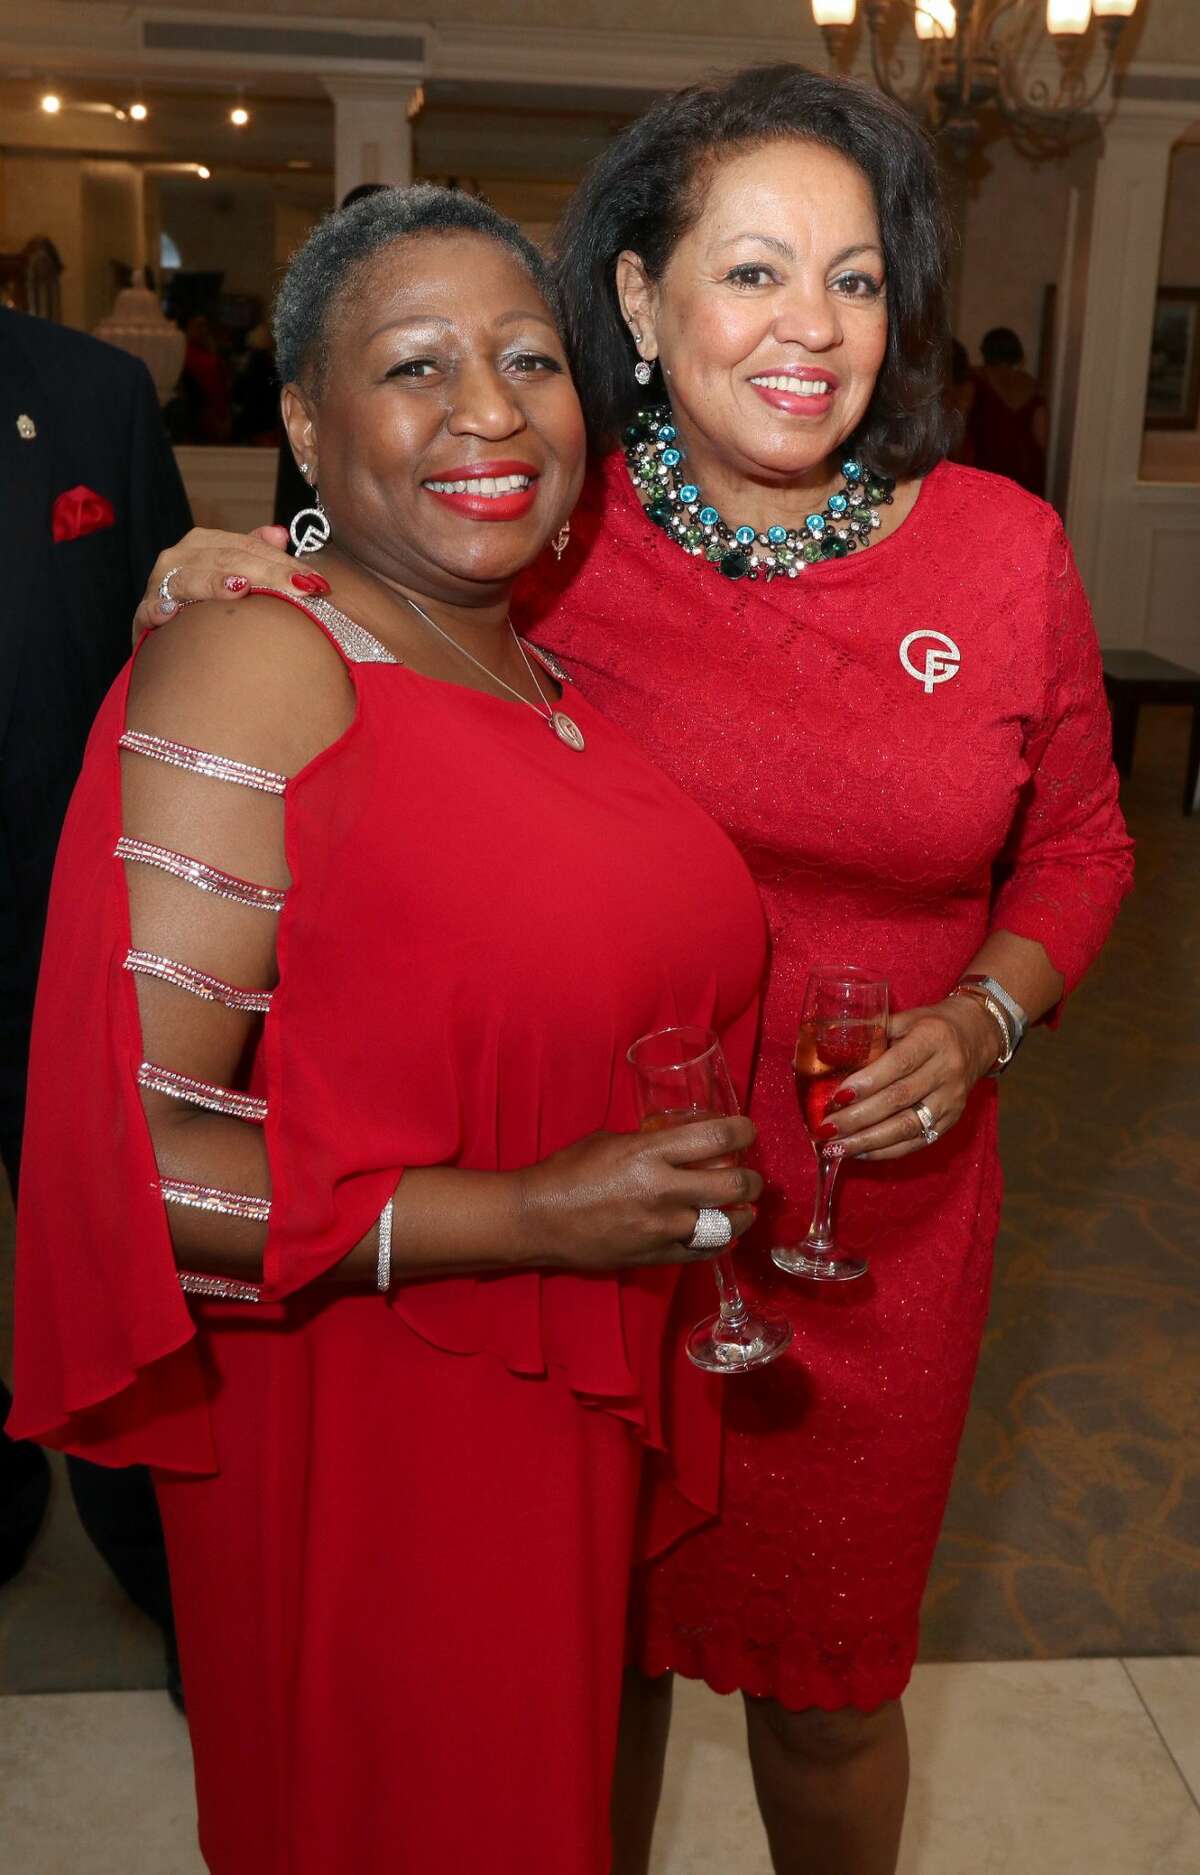 Were you Seen at the Girl Friends Inc.’s 26th annual Paint the Town Red fundraiser on Sunday, December 2, 2018 at the Glen Sanders Mansion in Scotia?